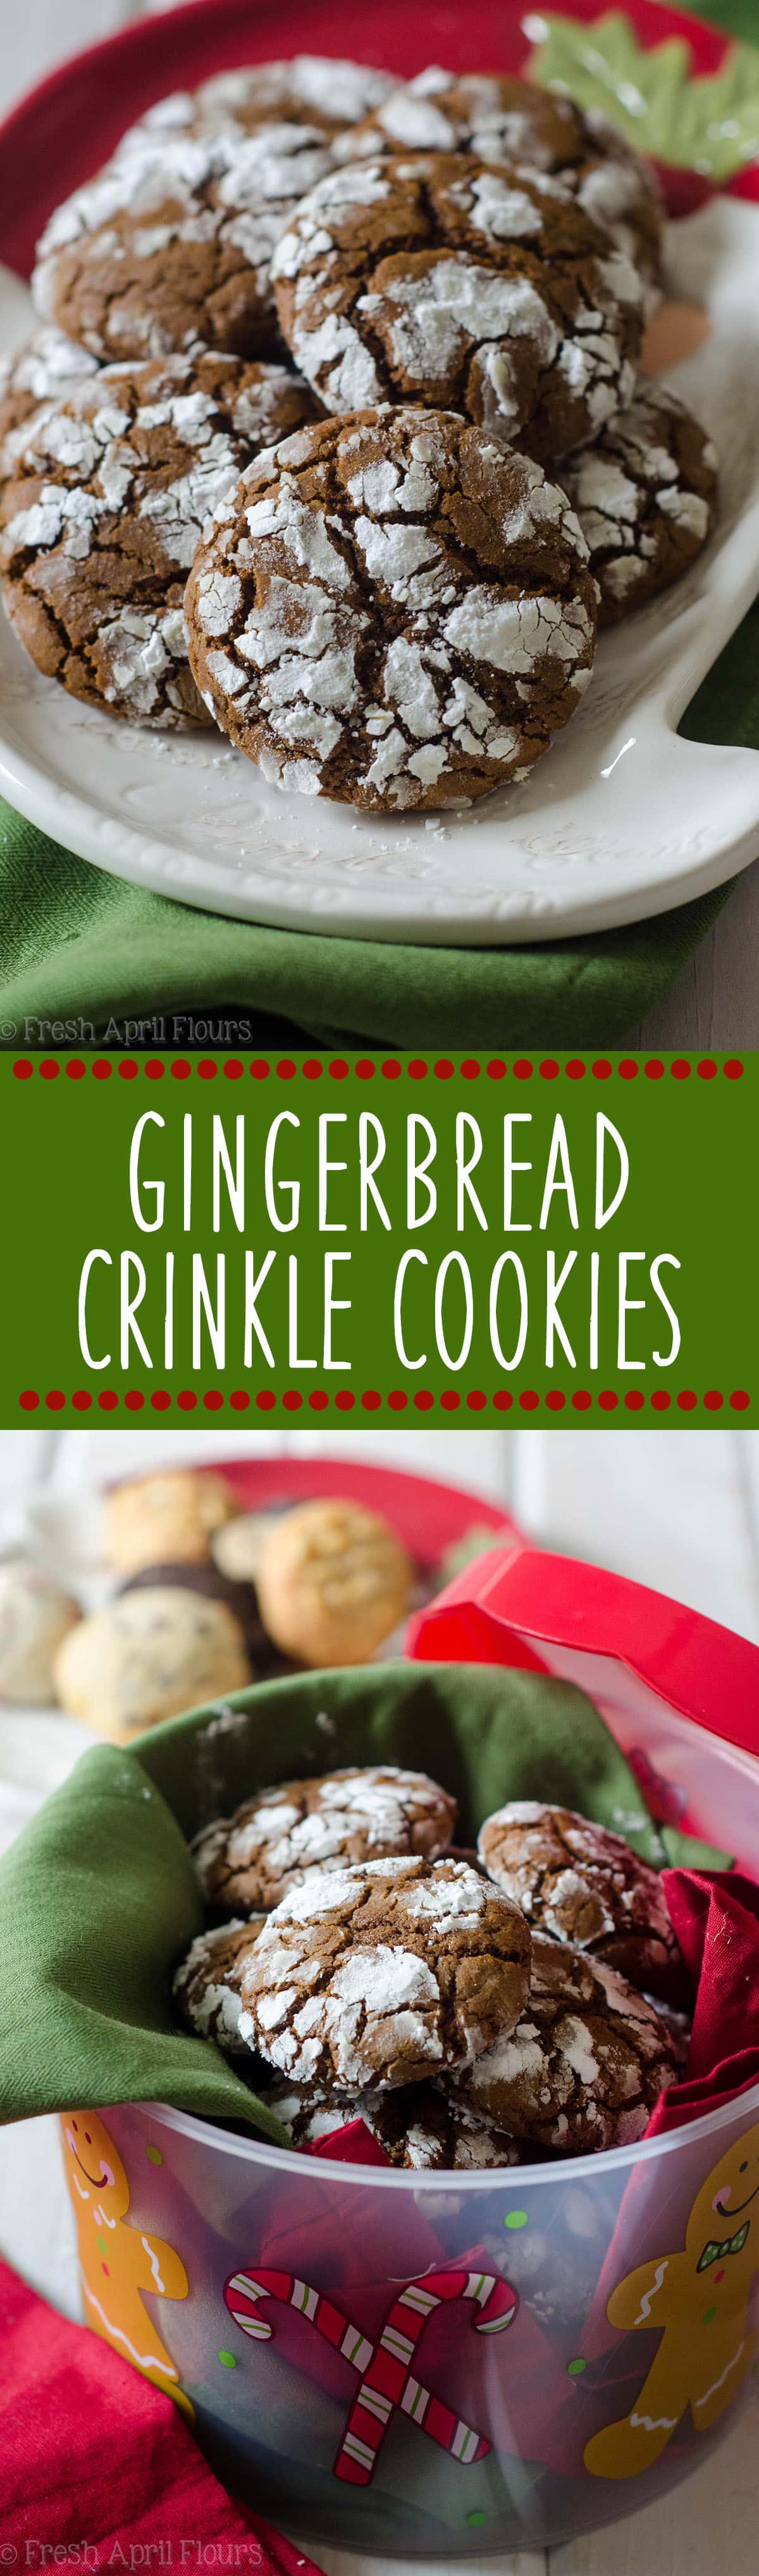 Gingerbread Crinkle Cookies: A crunchy, spicy cookie covered in sweet powdered sugar, perfect for dunking in a glass of eggnog. via @frshaprilflours